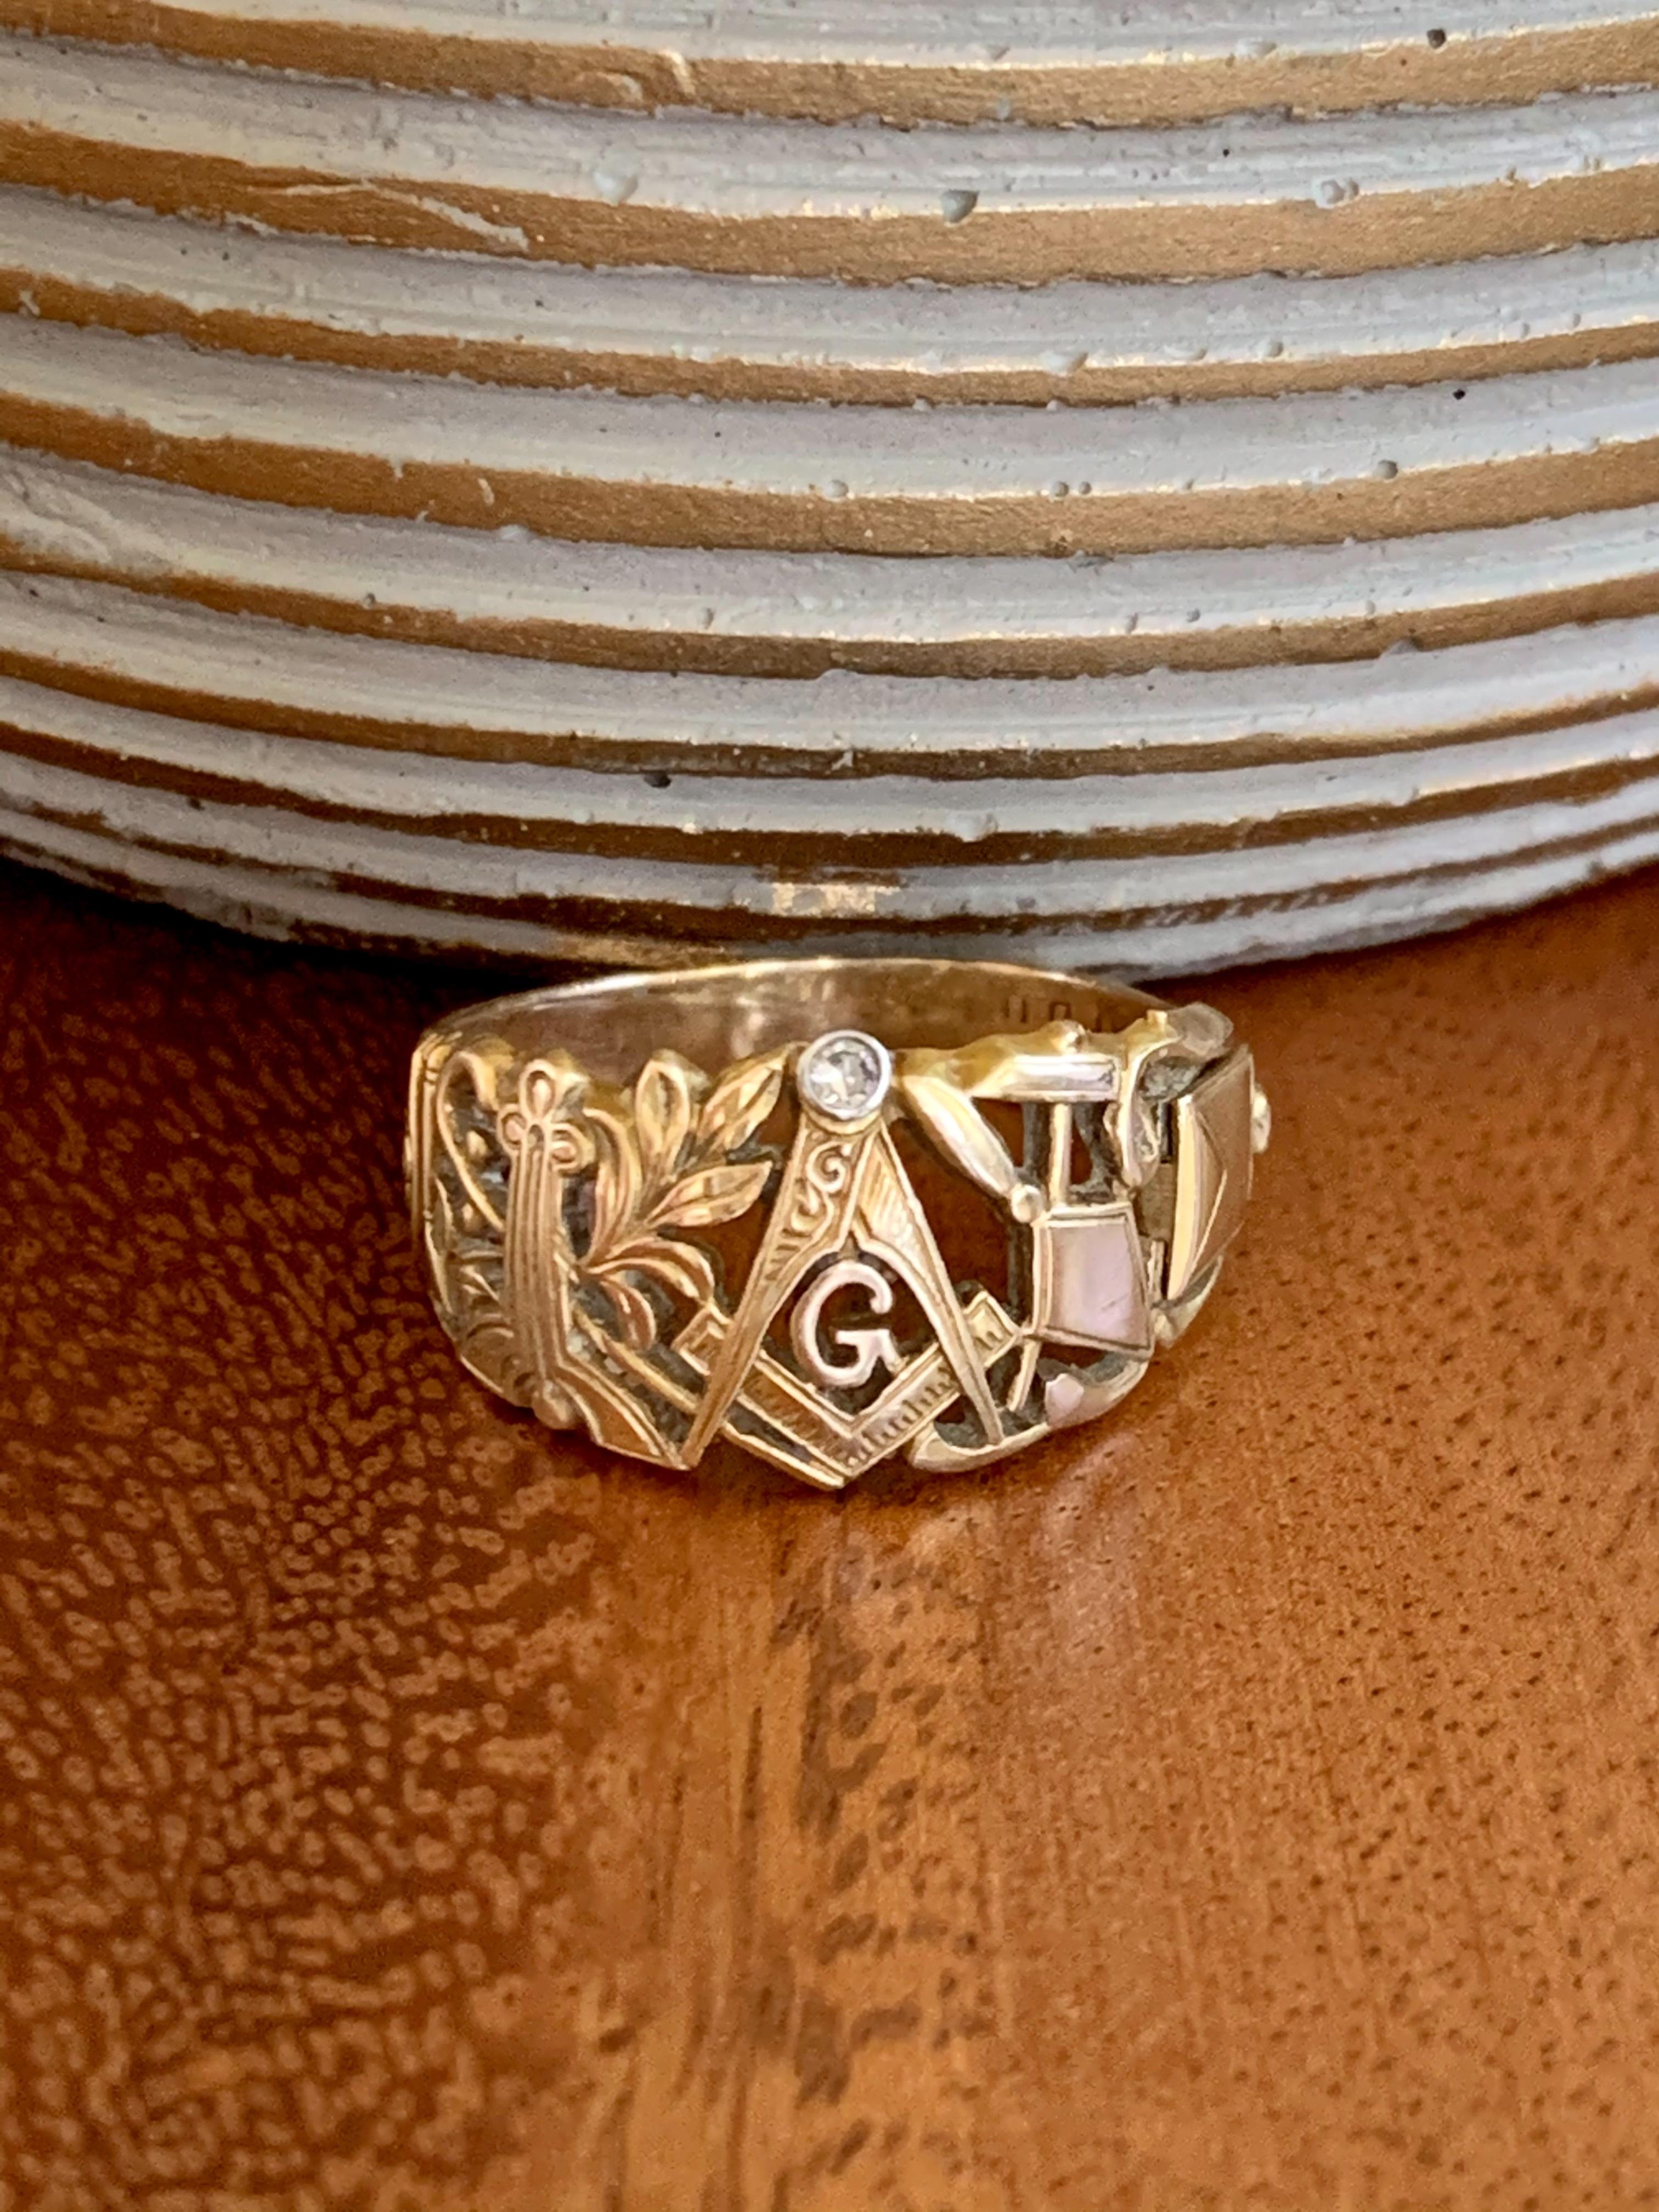 This vintage Masonic ring is lovely and classic.  It features a Diamond accent.

The ring is stamped 